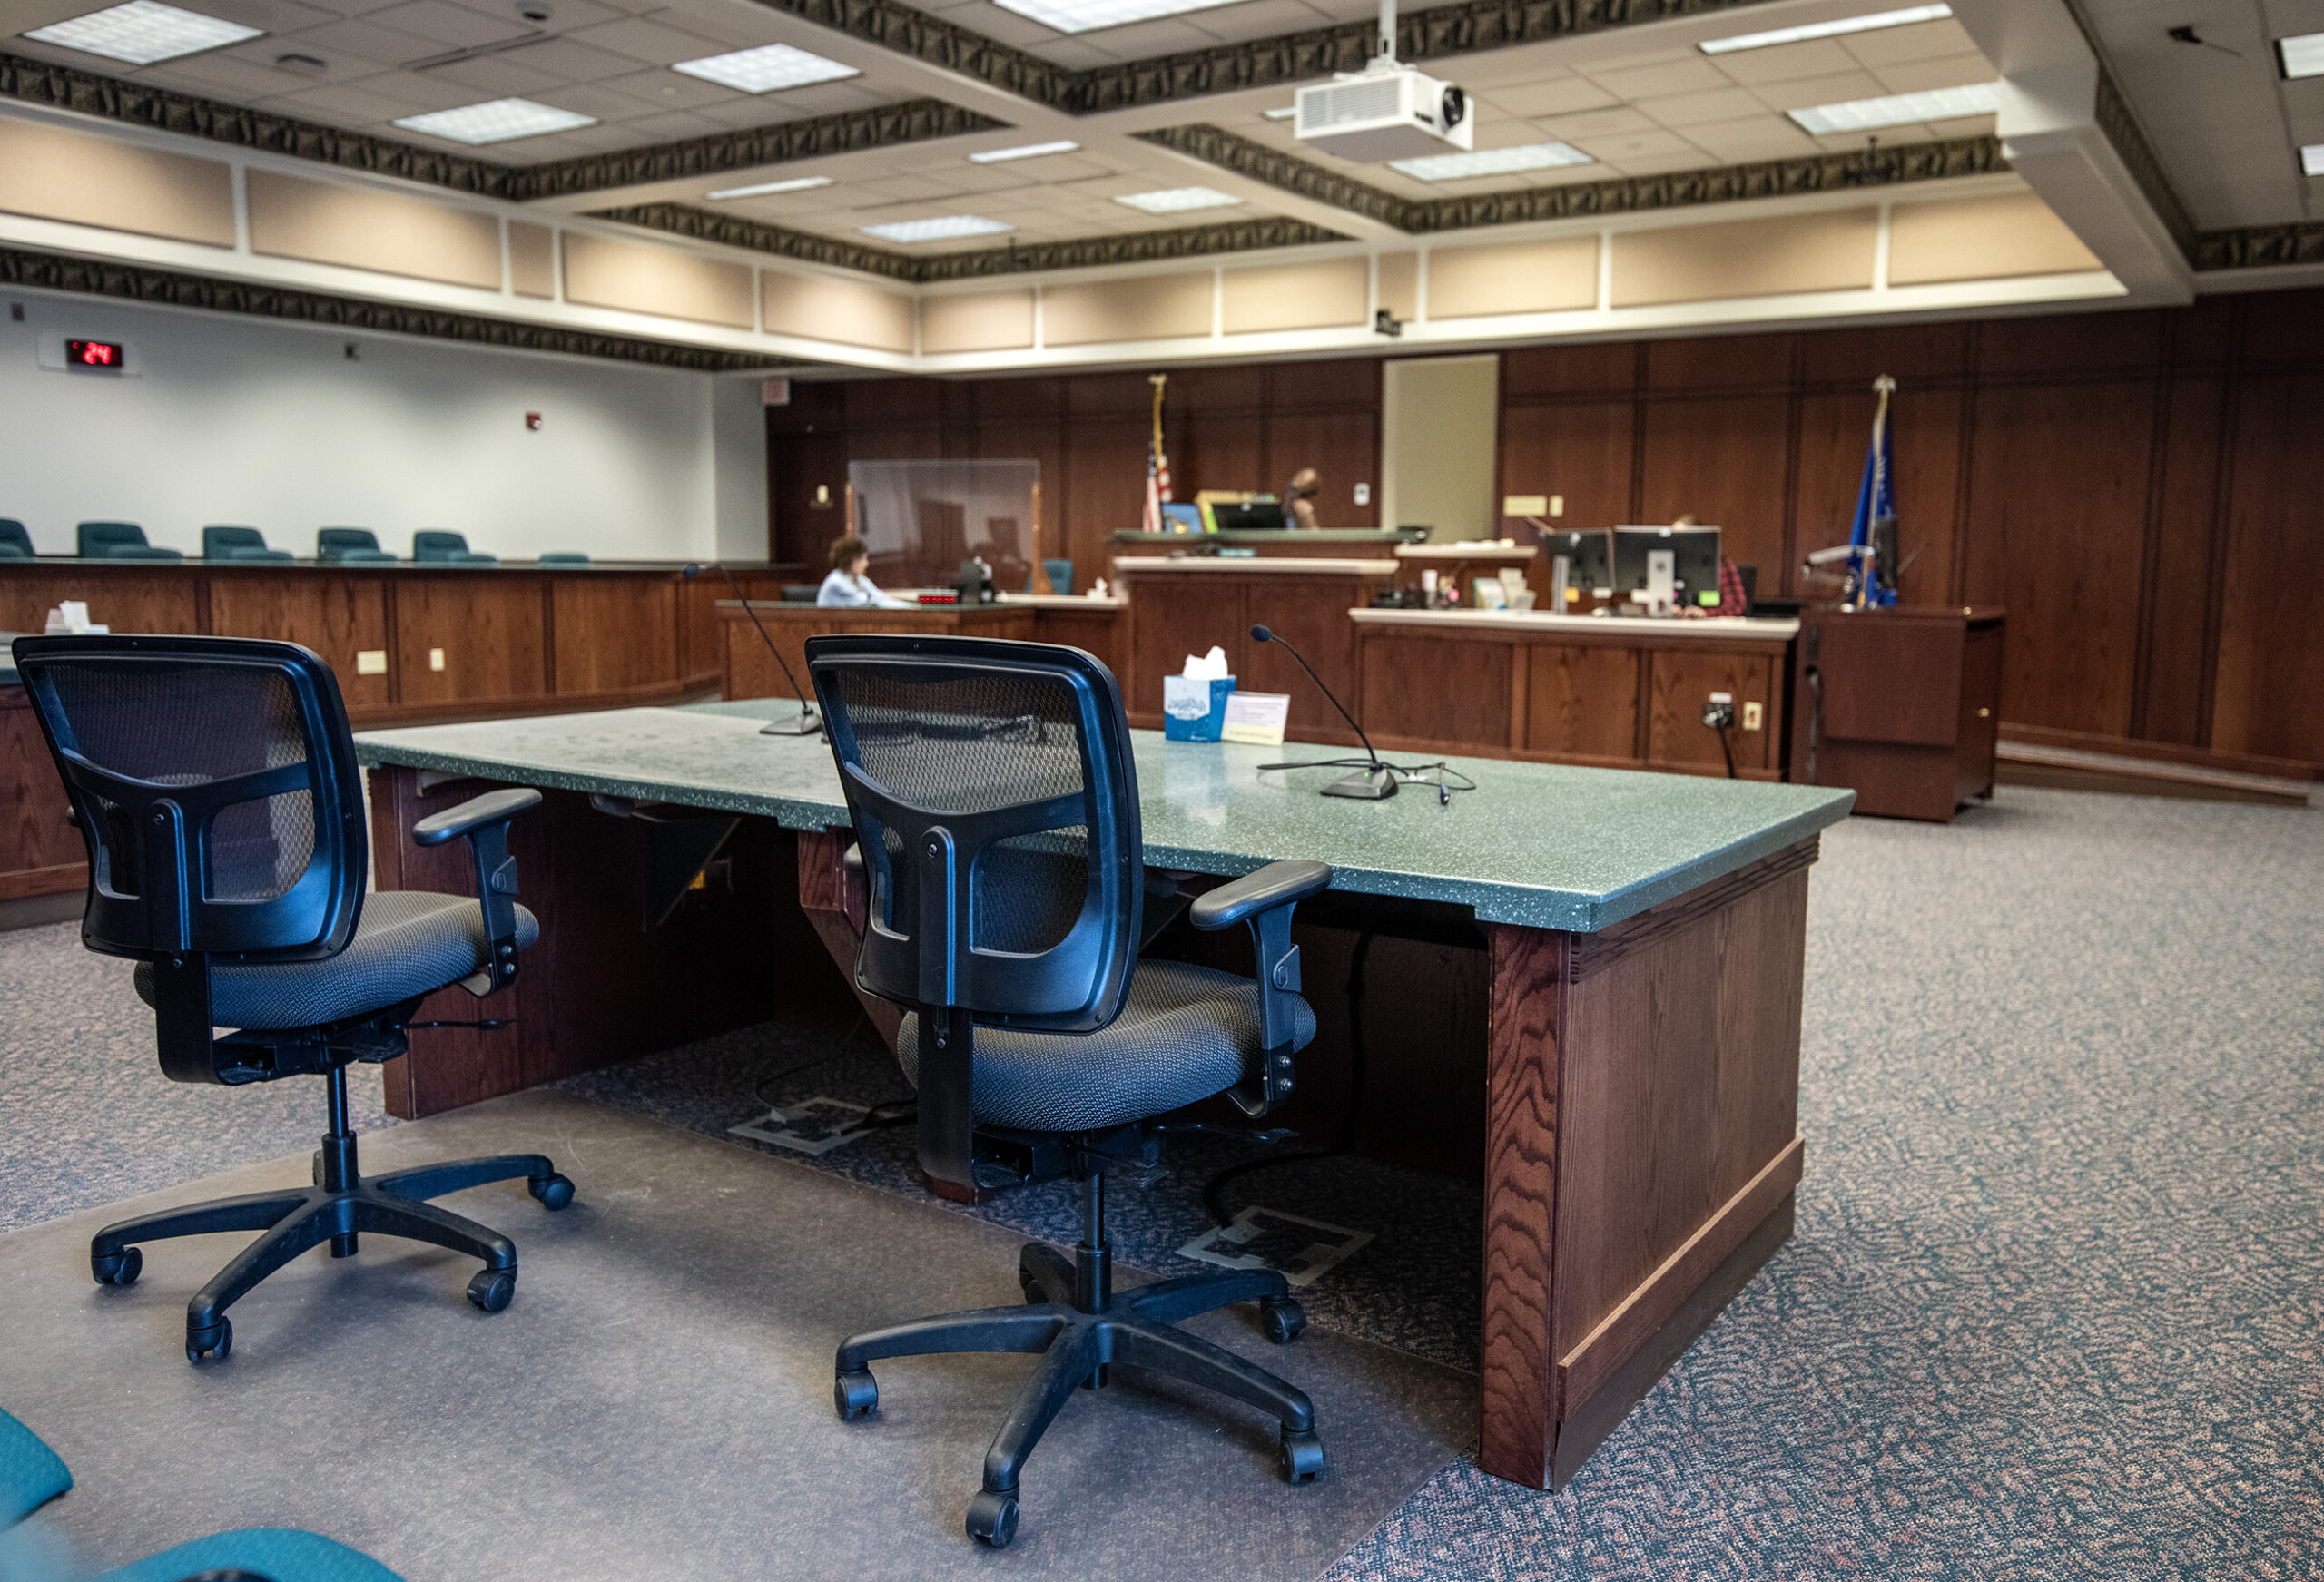 Prosecutor and public defender vacancies are down following newly approved raises in Wisconsin